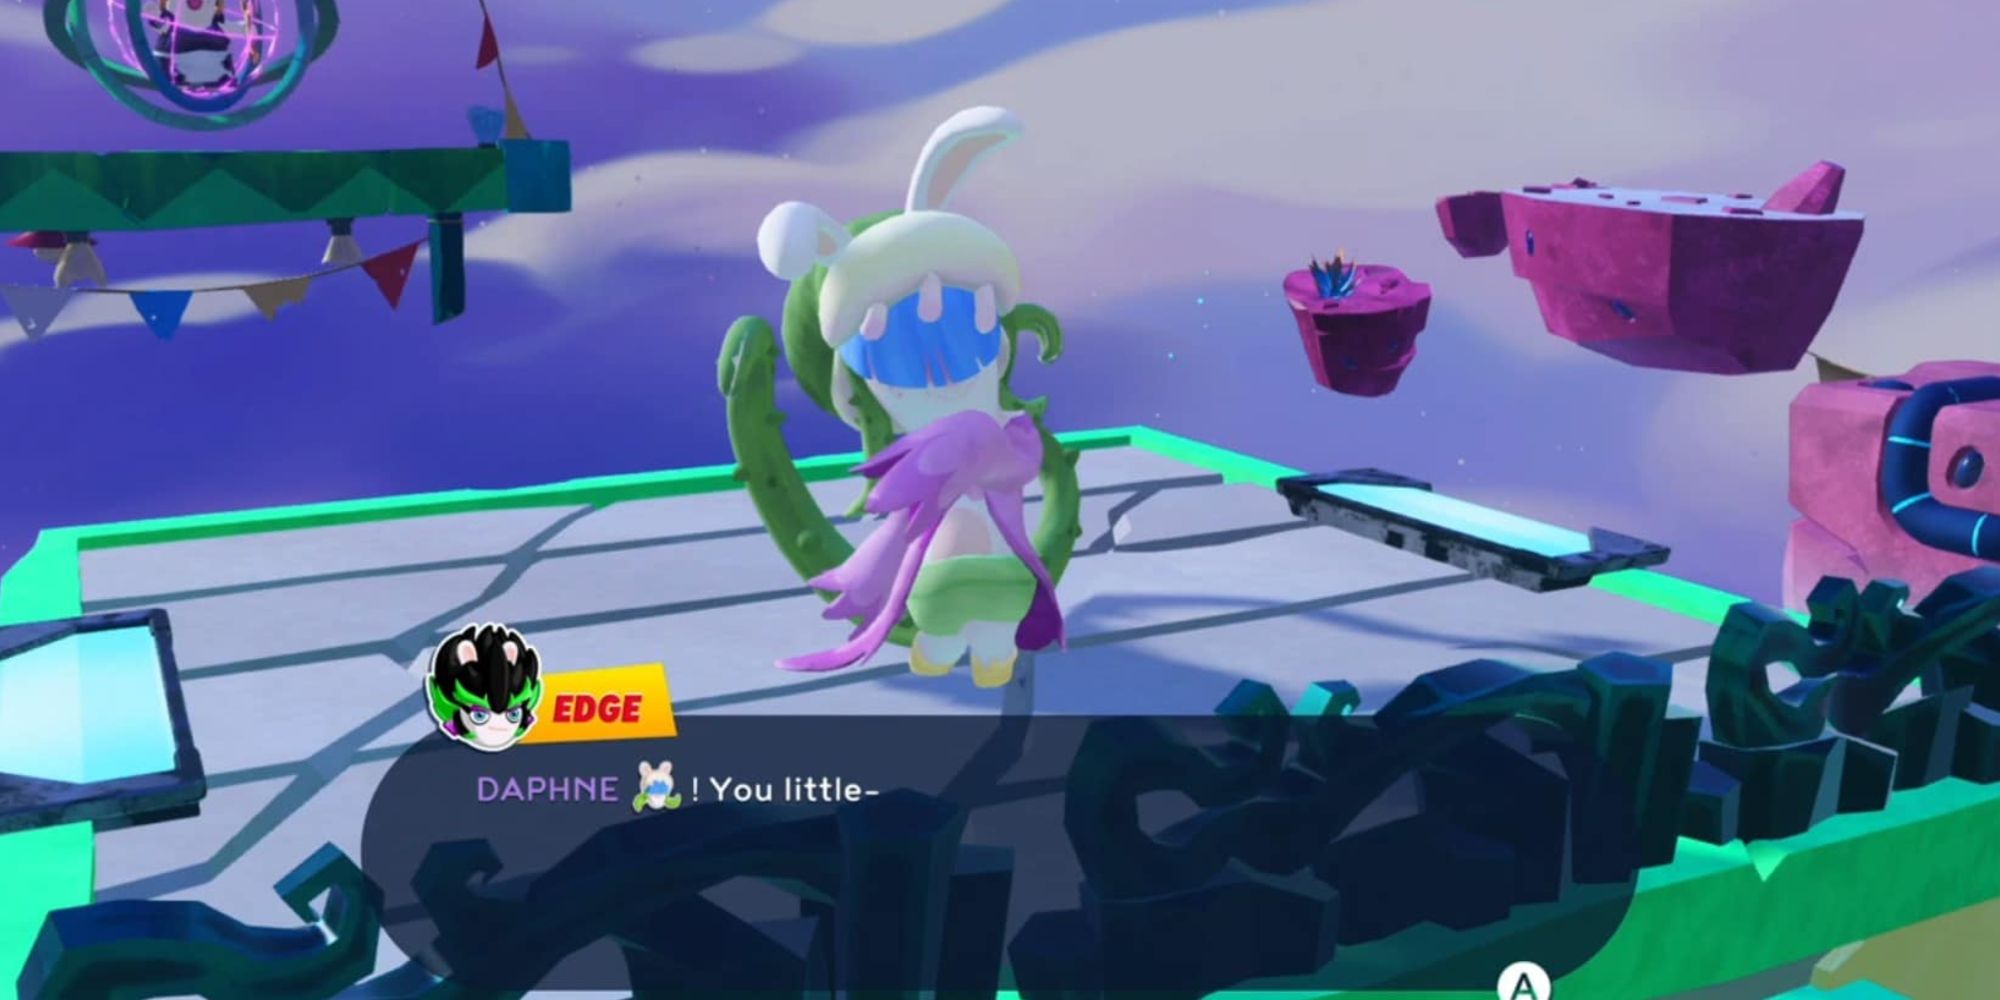 How to Beat Darkmess Edge in Mario + Rabbids: Sparks of Hope